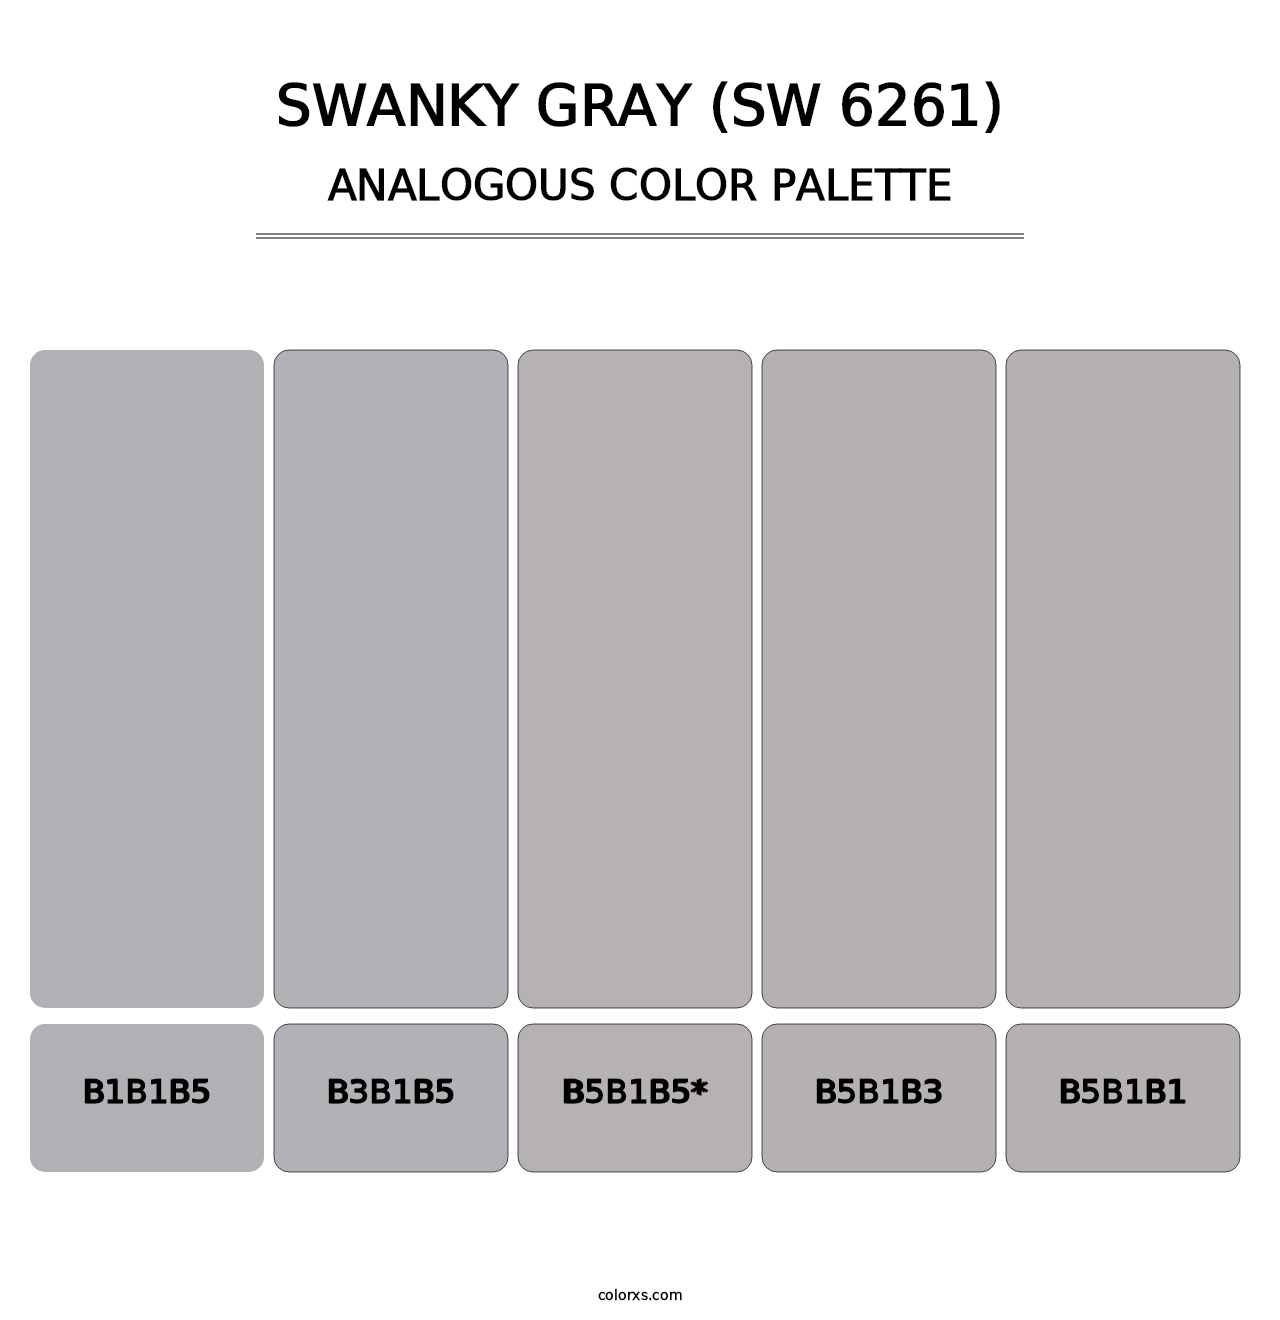 Swanky Gray (SW 6261) - Analogous Color Palette